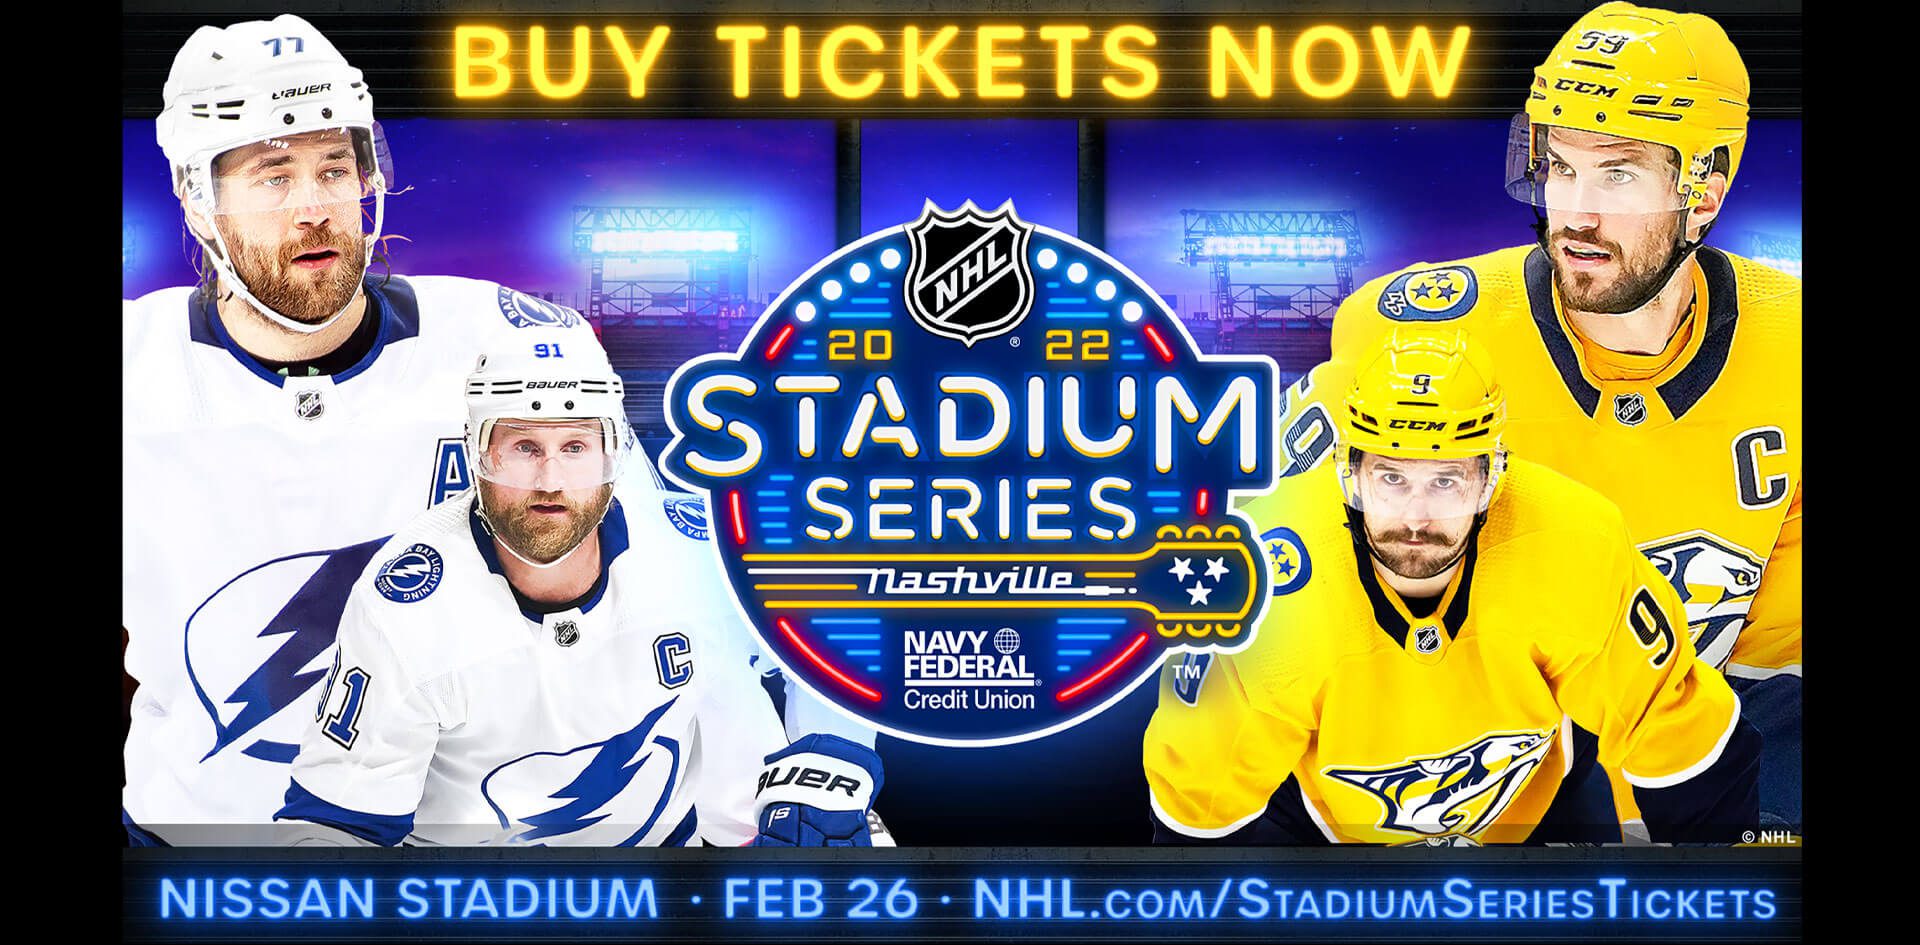 NHL Stadium Series coming to Nashville in February 2022